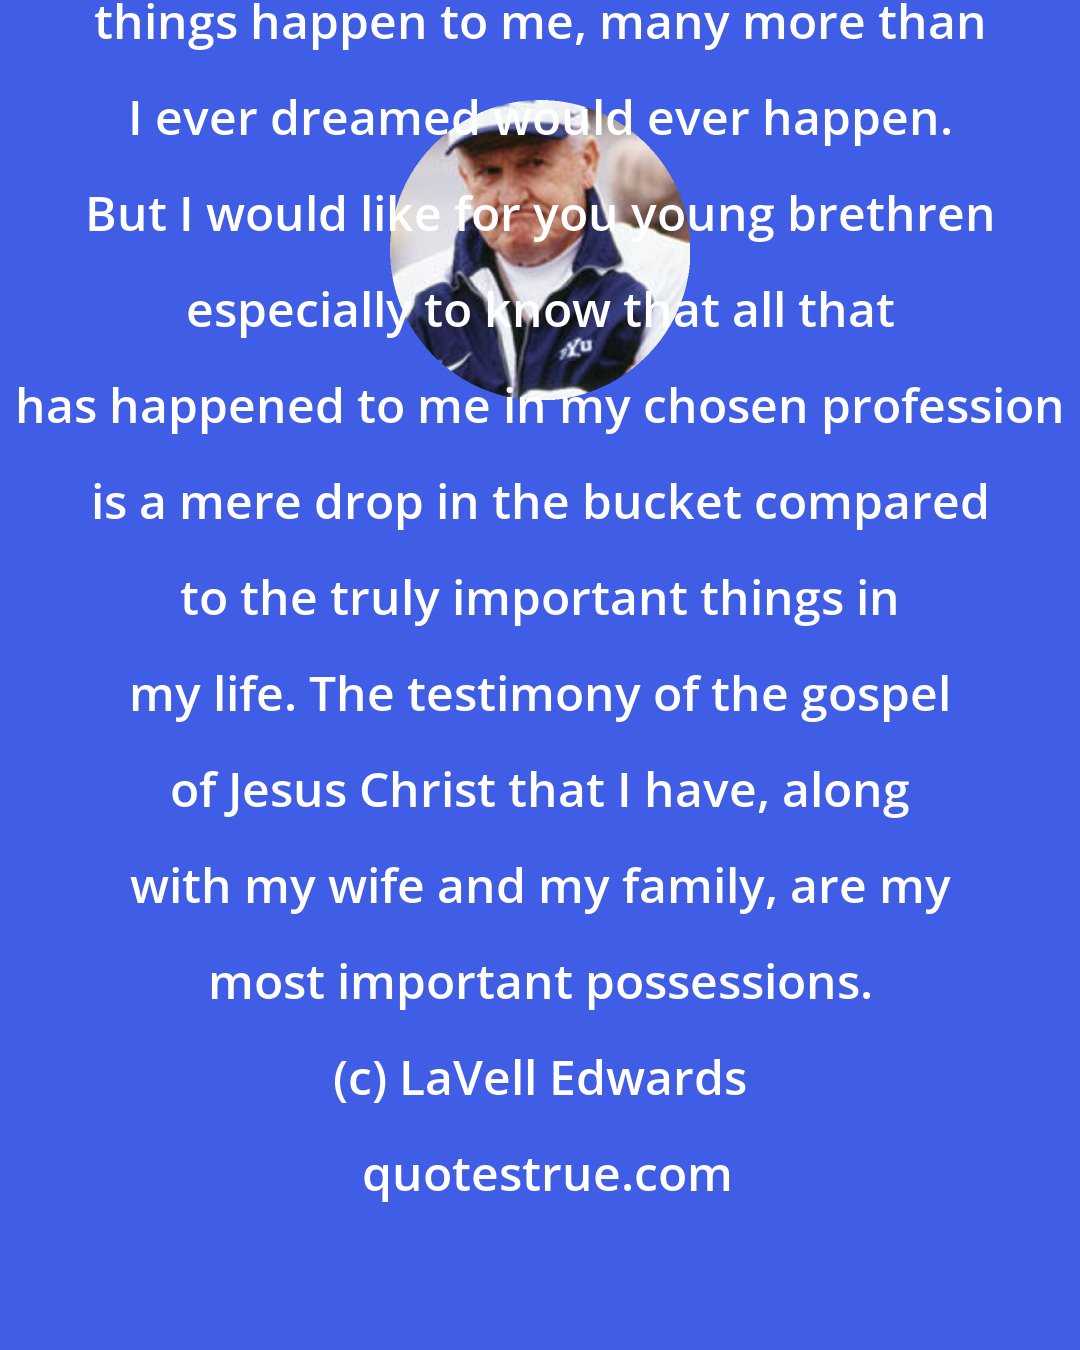 LaVell Edwards: In my career I have had many wonderful things happen to me, many more than I ever dreamed would ever happen. But I would like for you young brethren especially to know that all that has happened to me in my chosen profession is a mere drop in the bucket compared to the truly important things in my life. The testimony of the gospel of Jesus Christ that I have, along with my wife and my family, are my most important possessions.